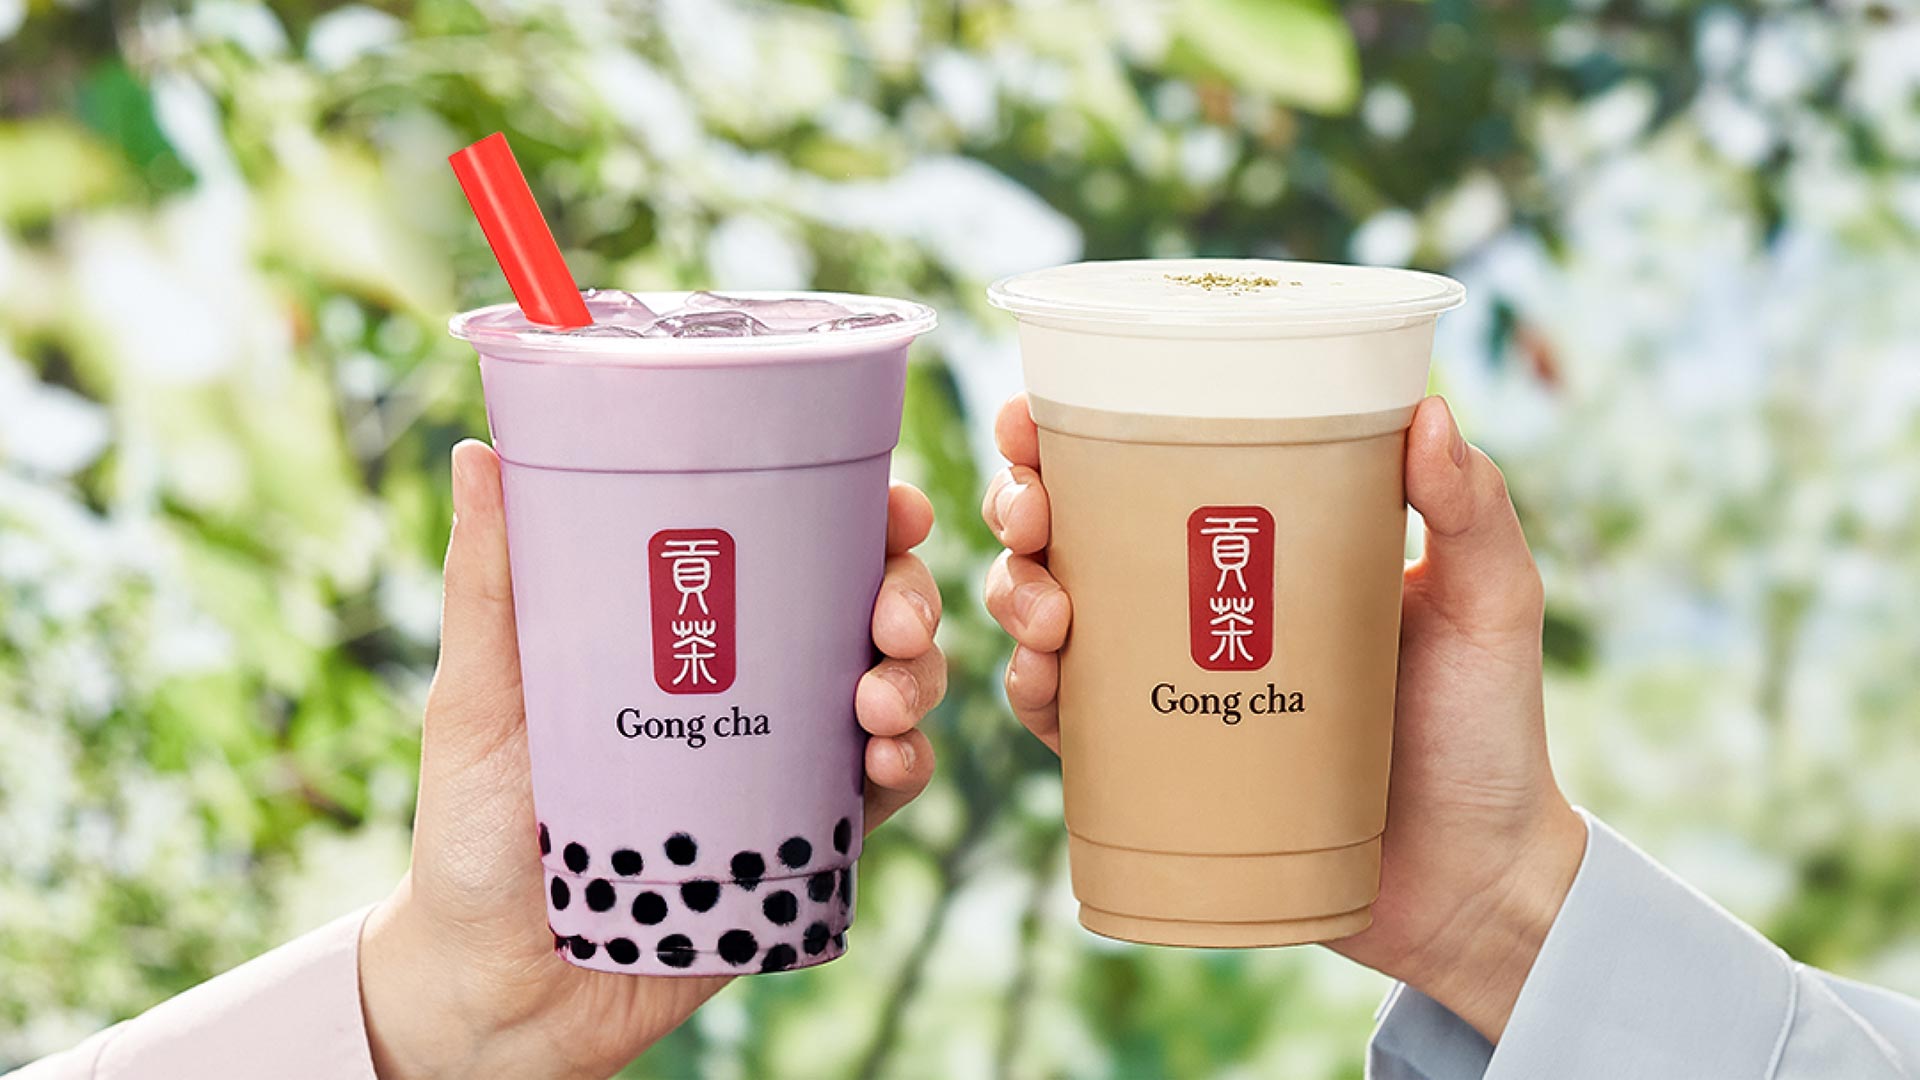 Support for Gong cha franchises